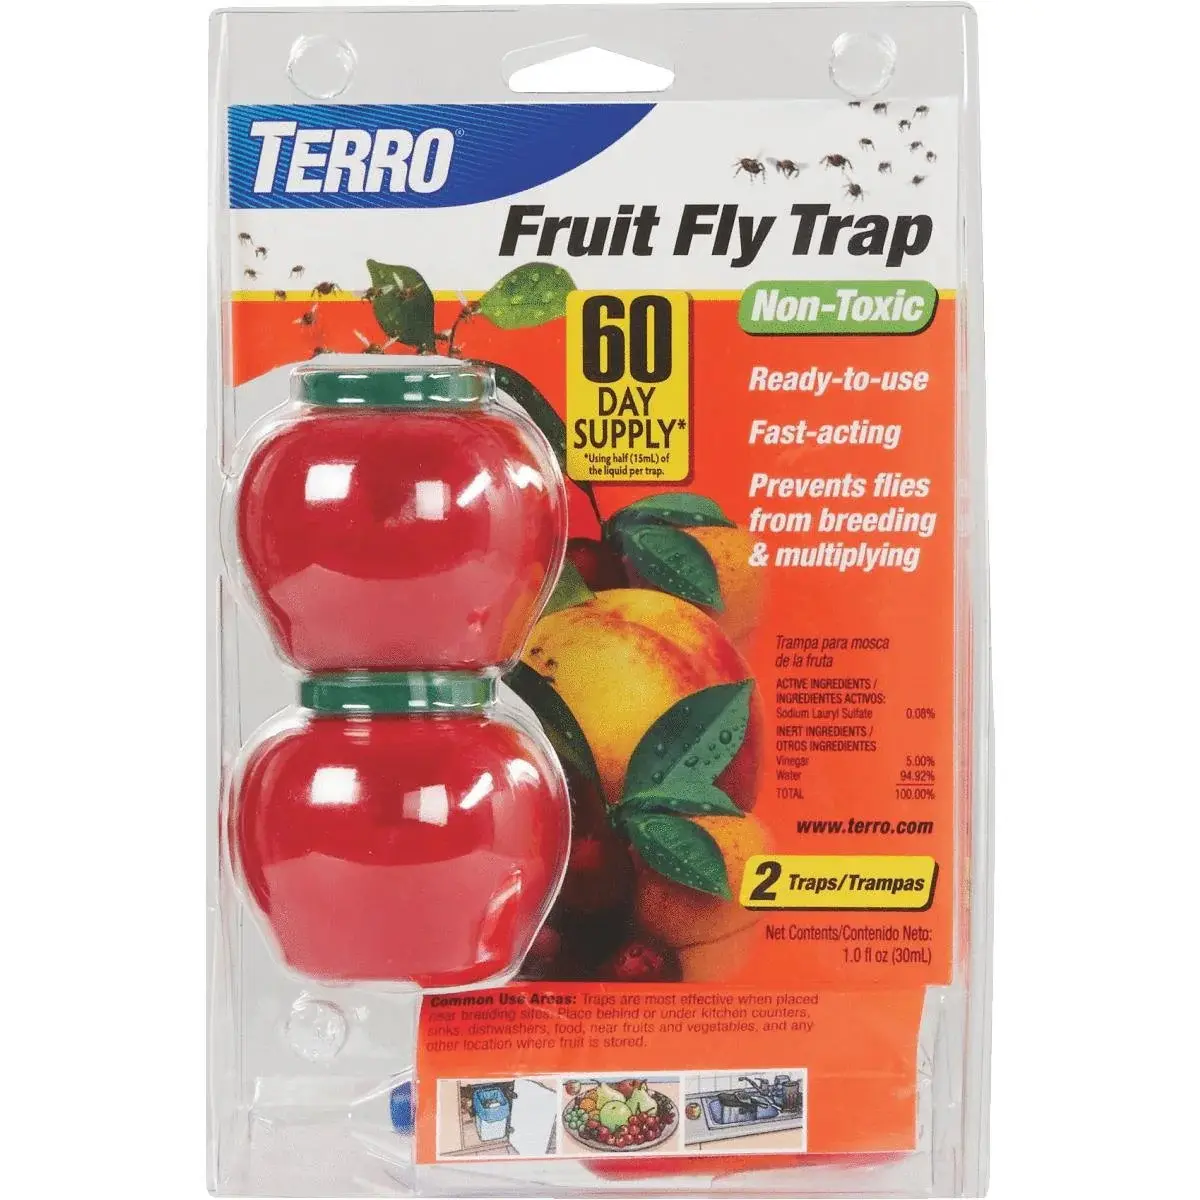 Ready-to-Use Indoor Fruit Fly Killer and Trap with Built in Window - 4 Traps + 180 day Lure Supply